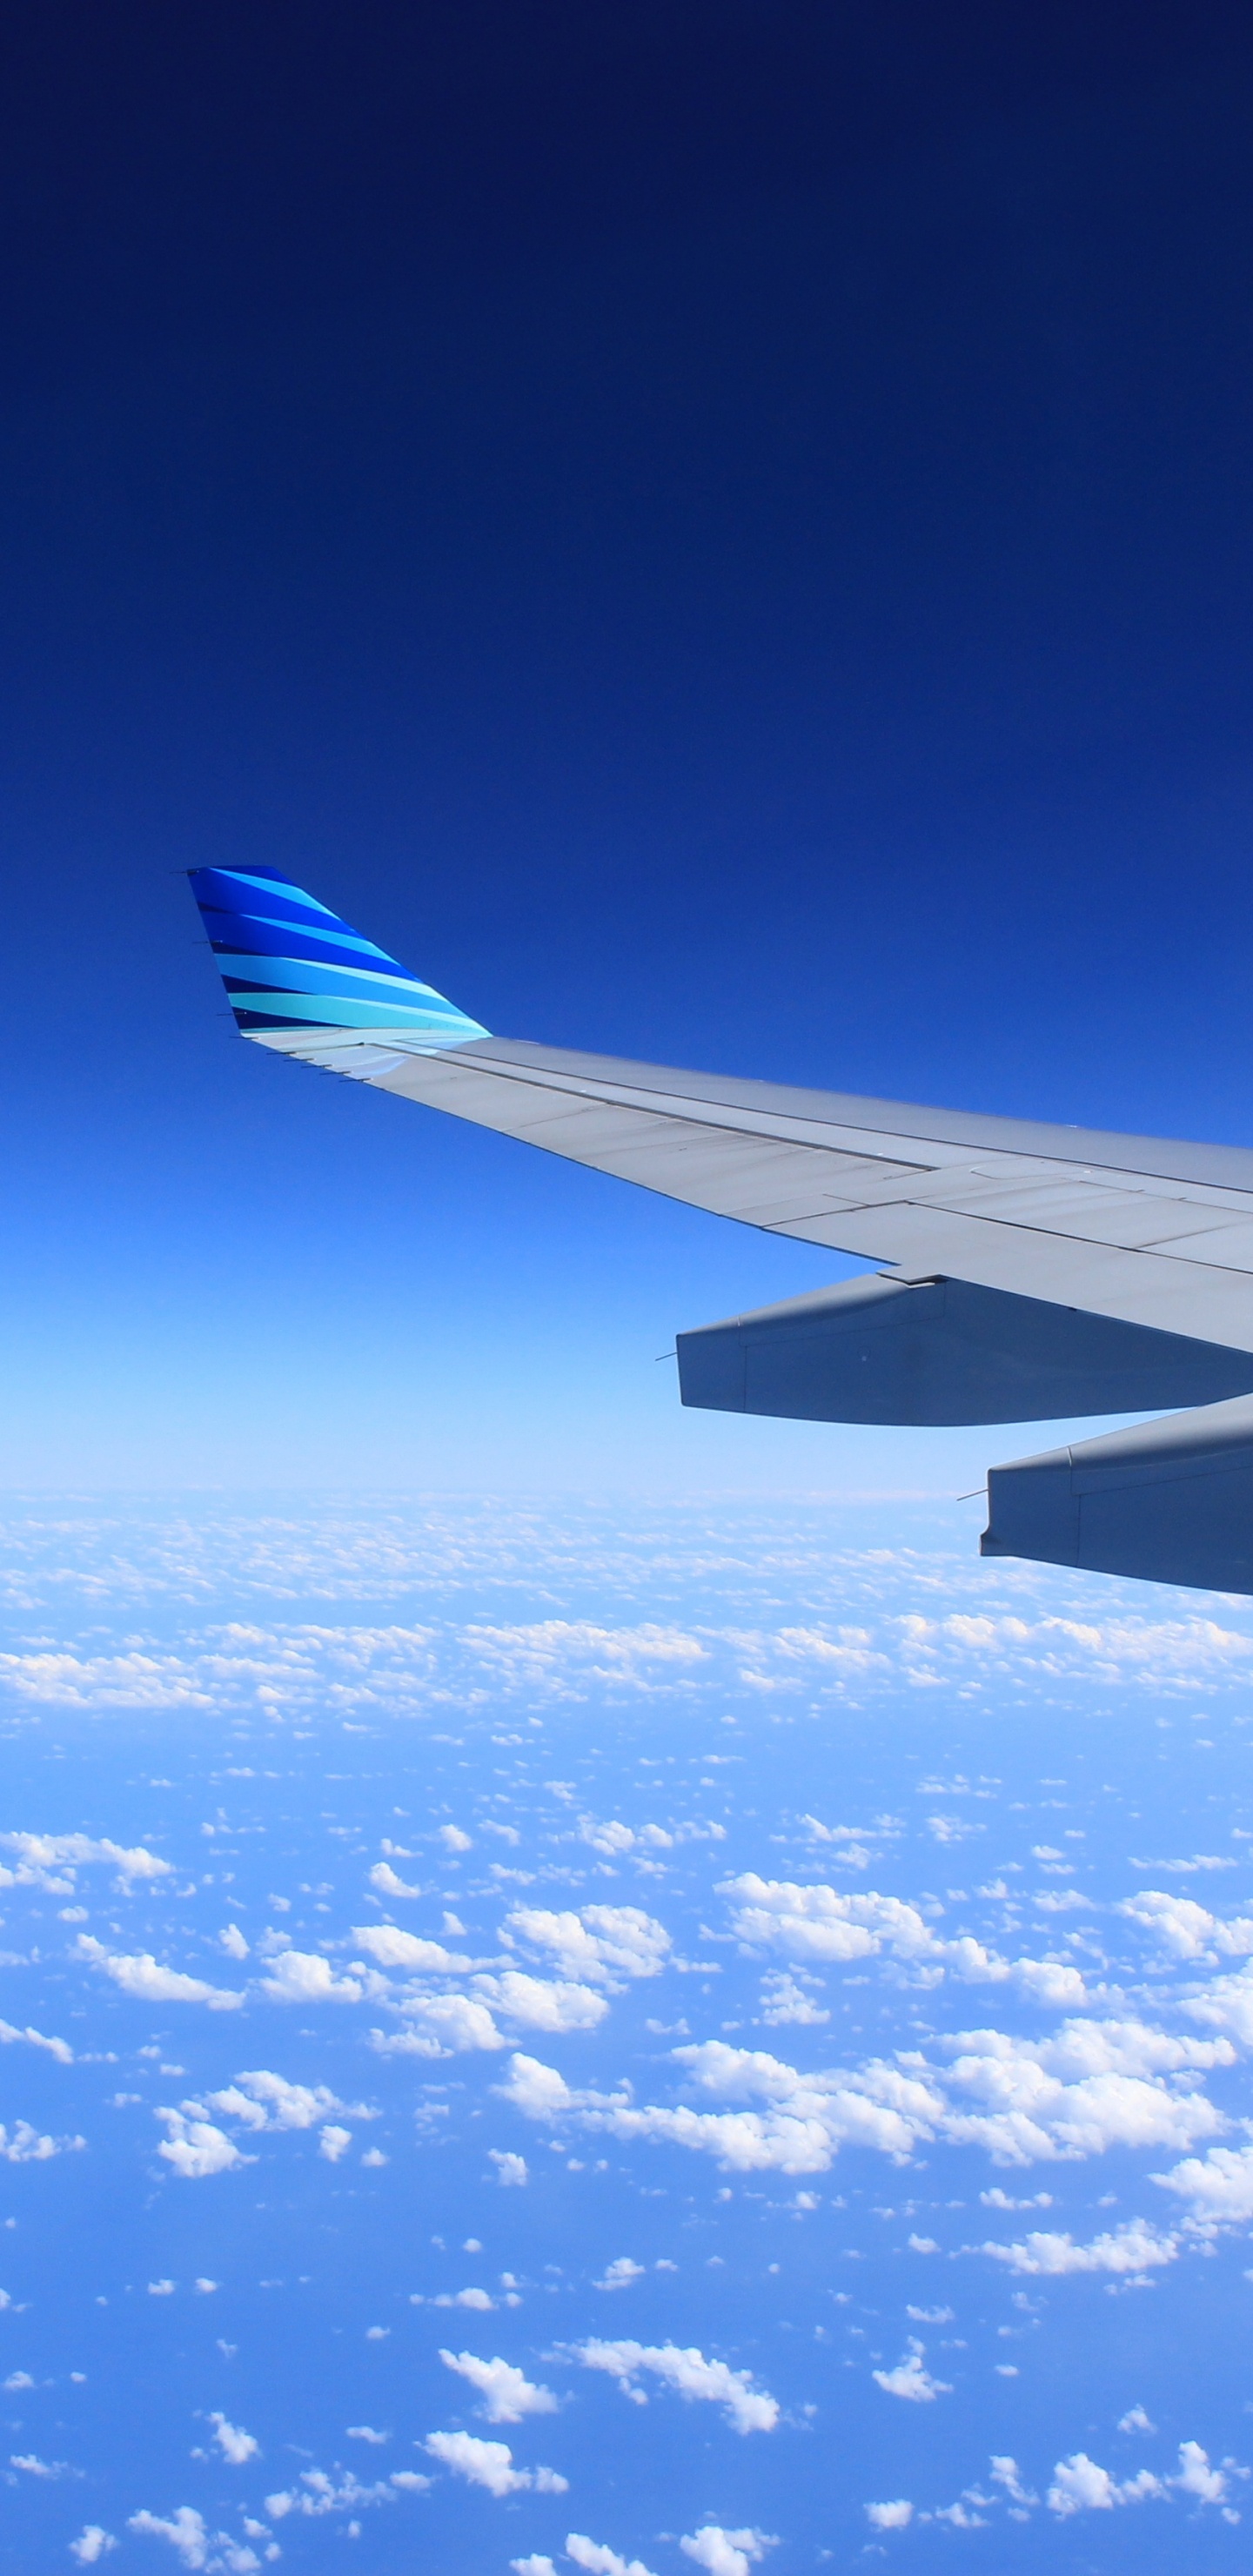 White and Blue Airplane Wing Under Blue Sky During Daytime. Wallpaper in 1440x2960 Resolution